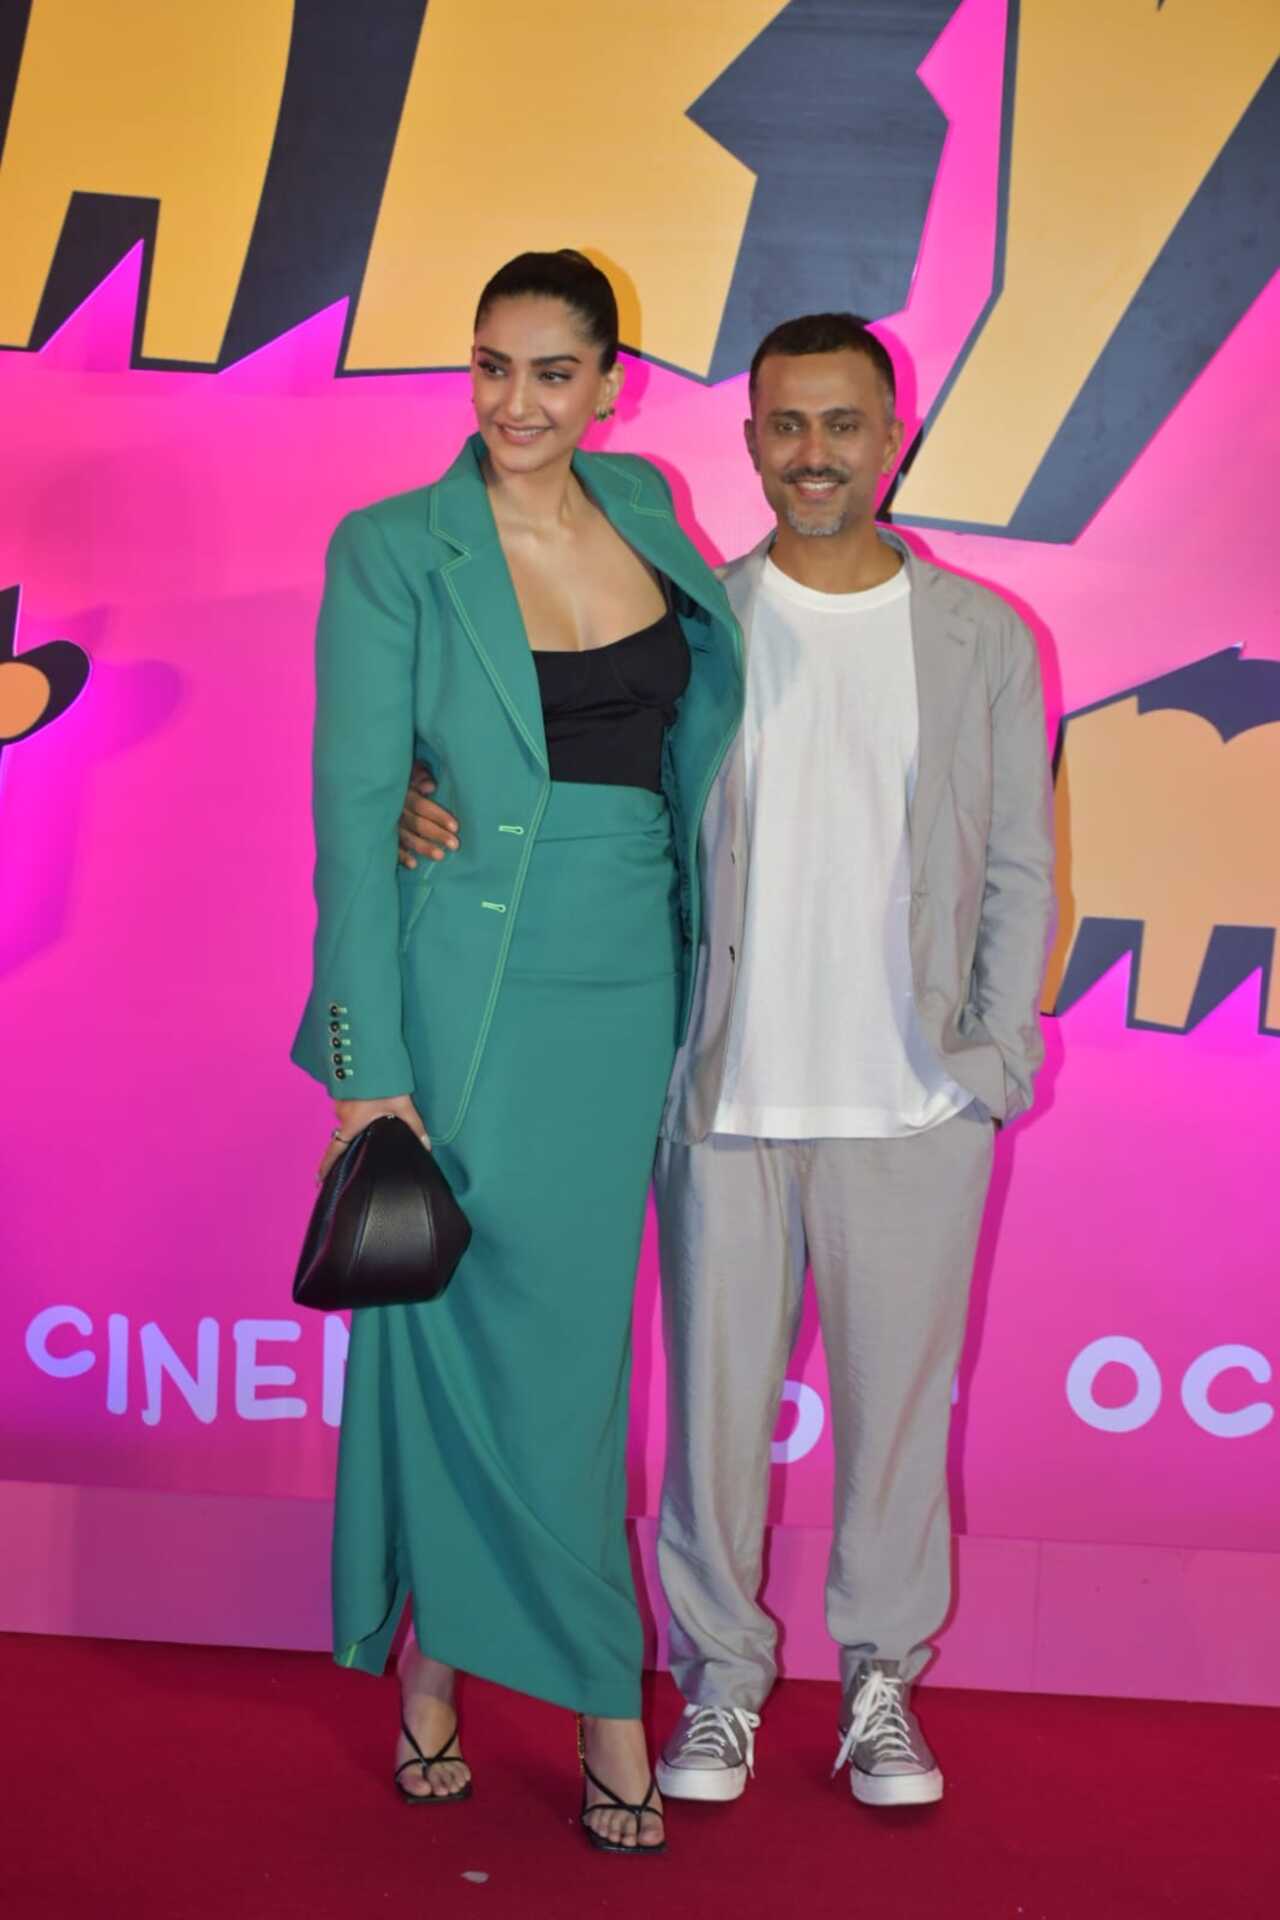 Sonam Kapoor attended the screening with Anand Ahuja